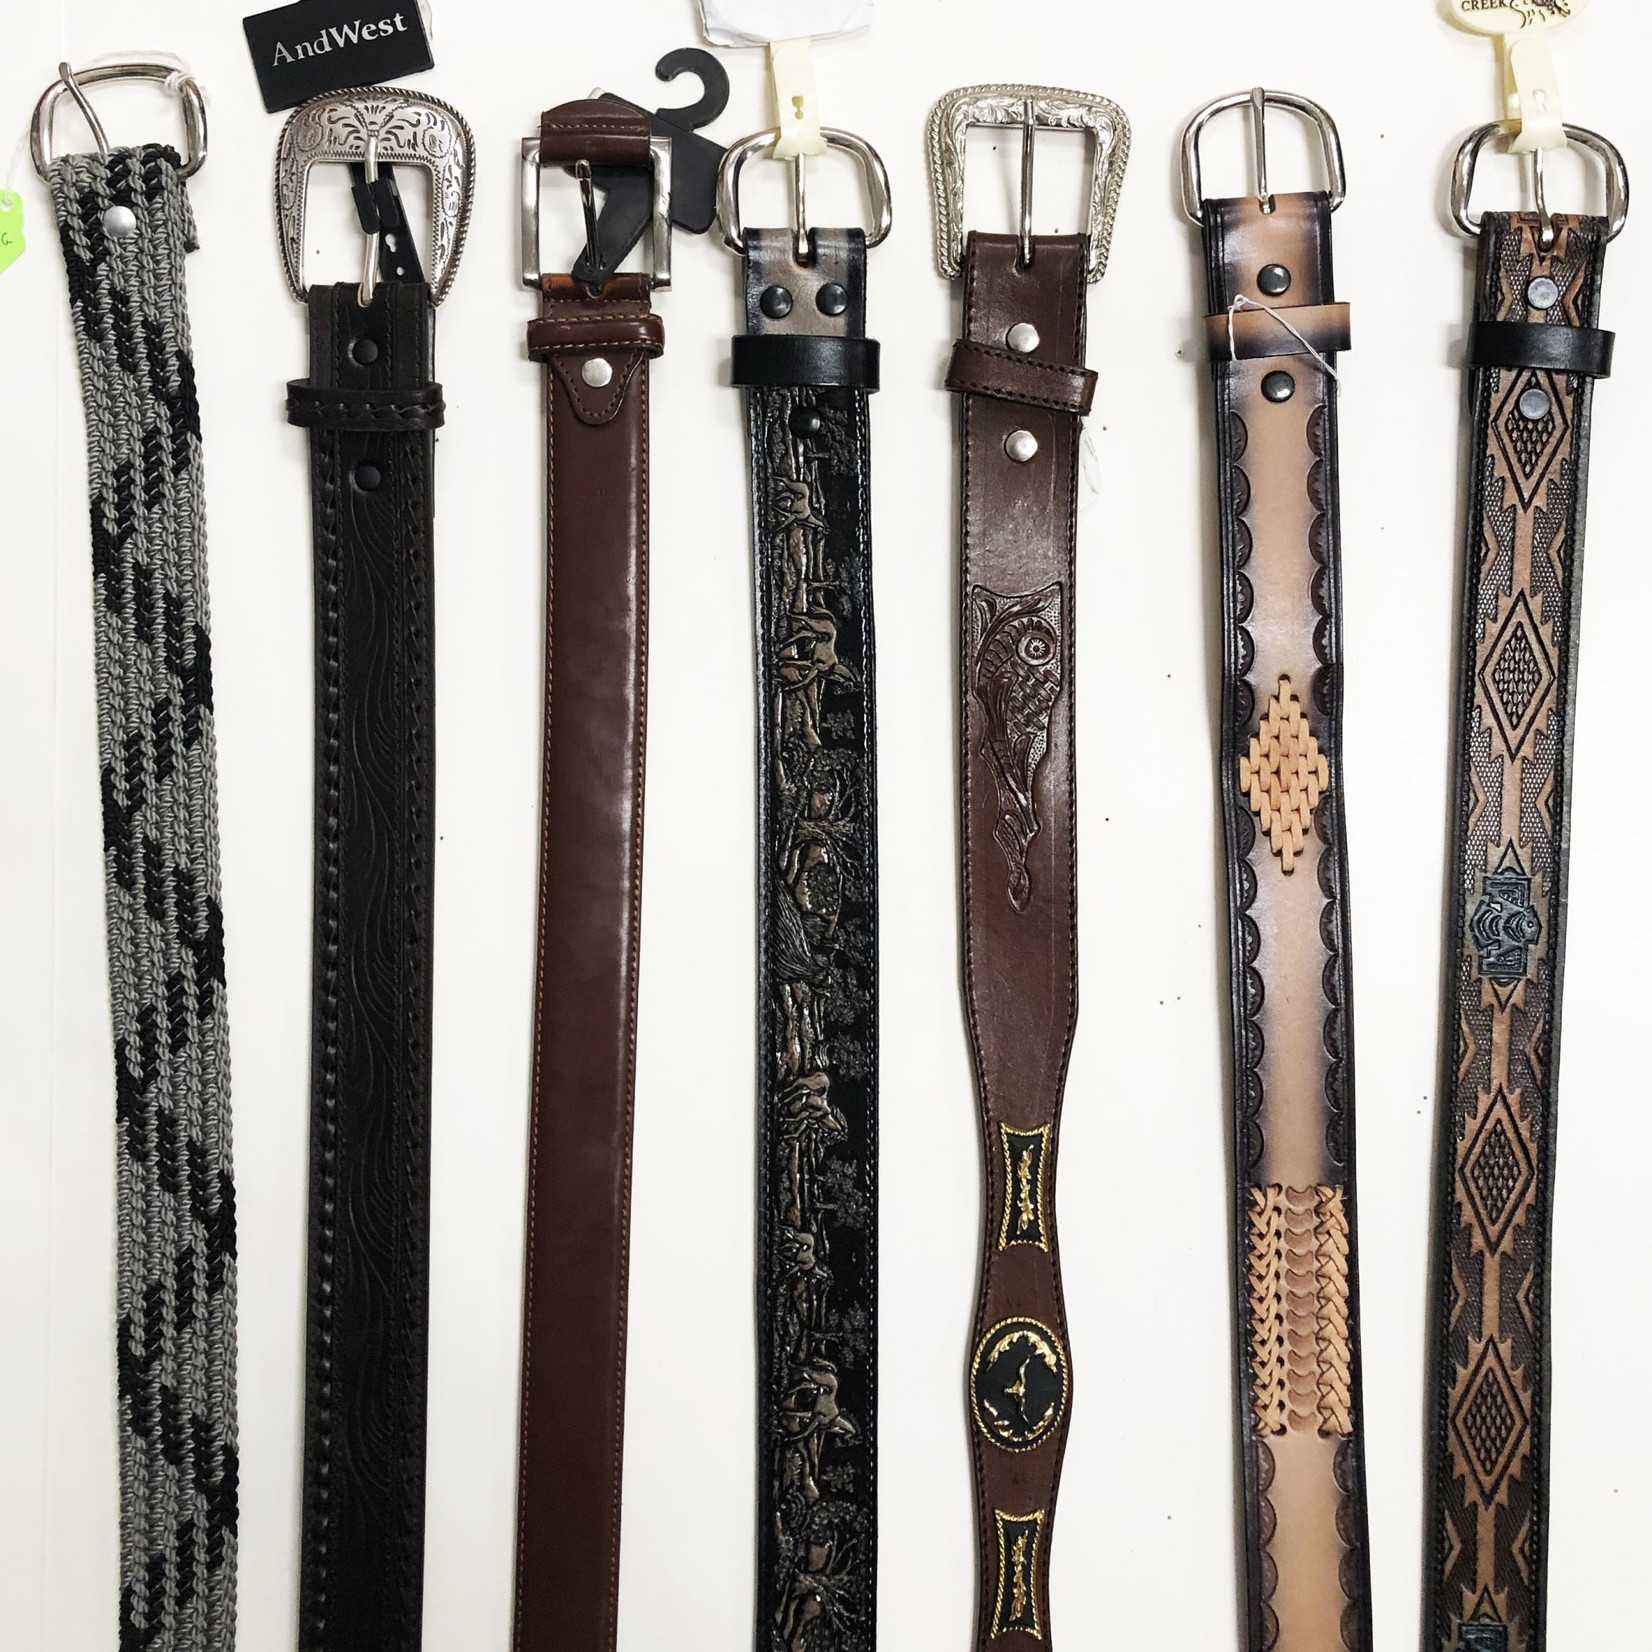 AndWest Stitched Leather Belt